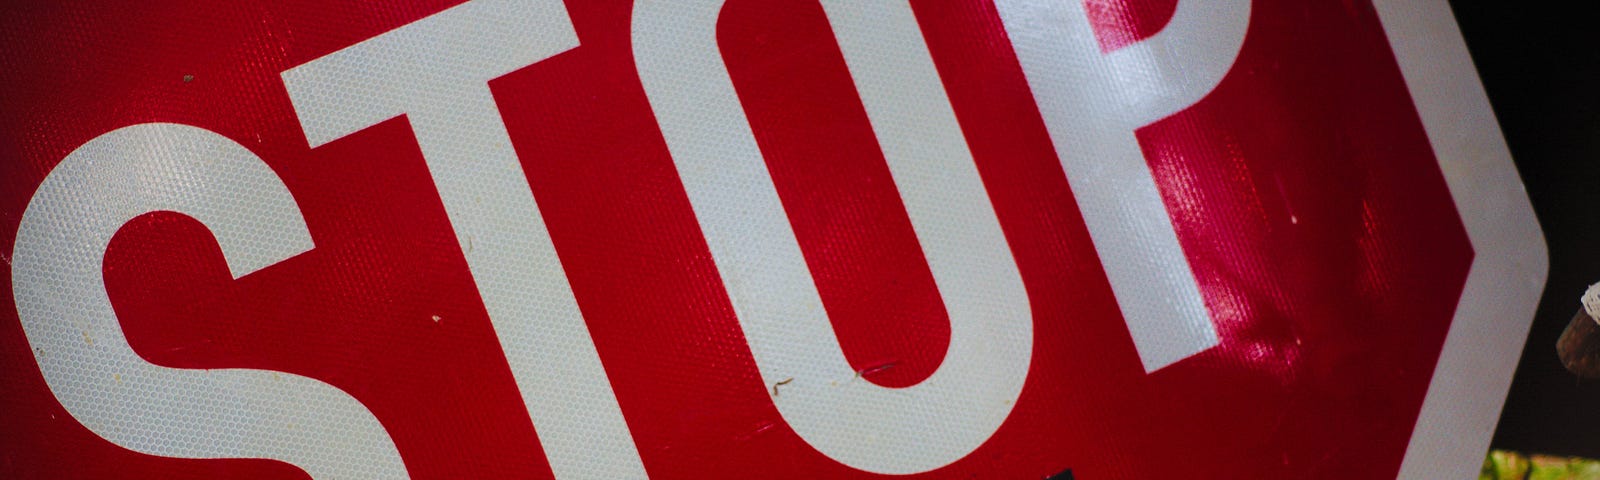 A close up of a stop sign that has “in the name of love” written underneath it.